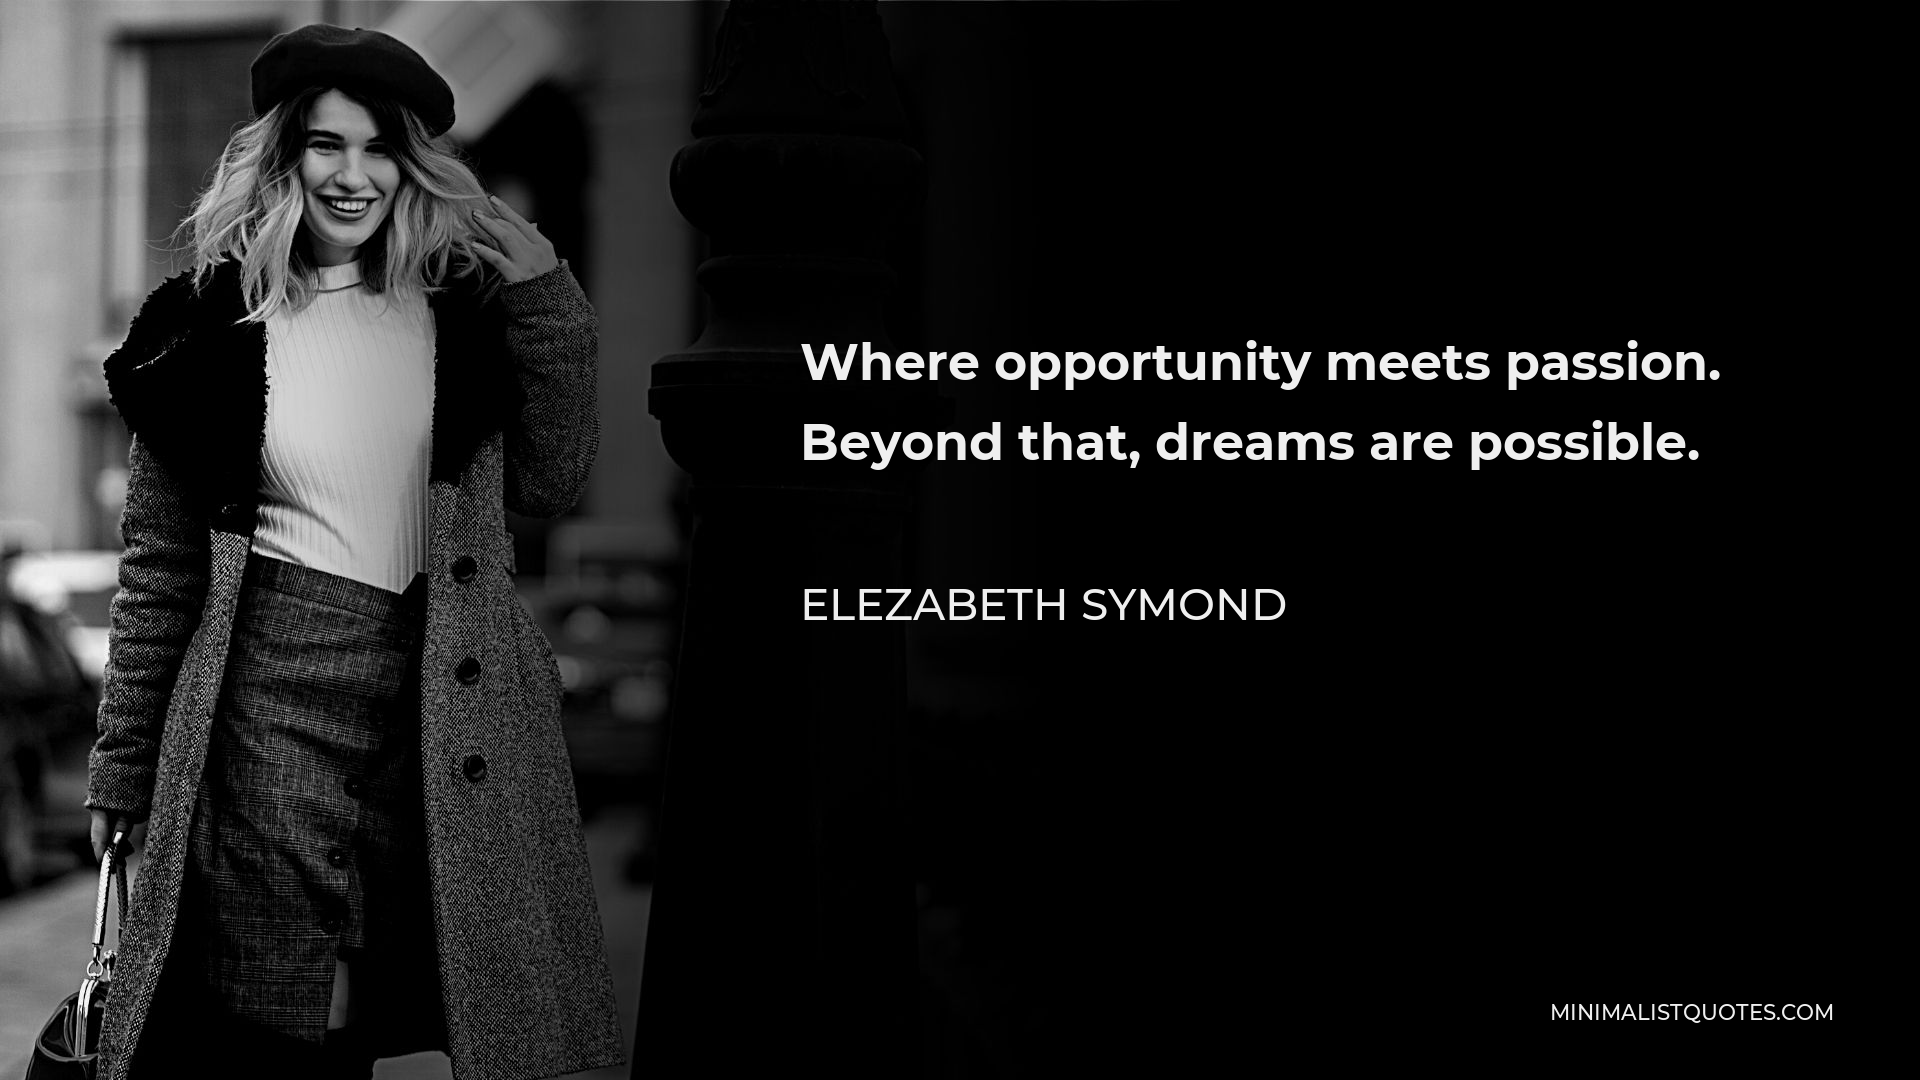 Elezabeth Symond Quote - Where opportunity meets passion. Beyond that, dreams are possible.